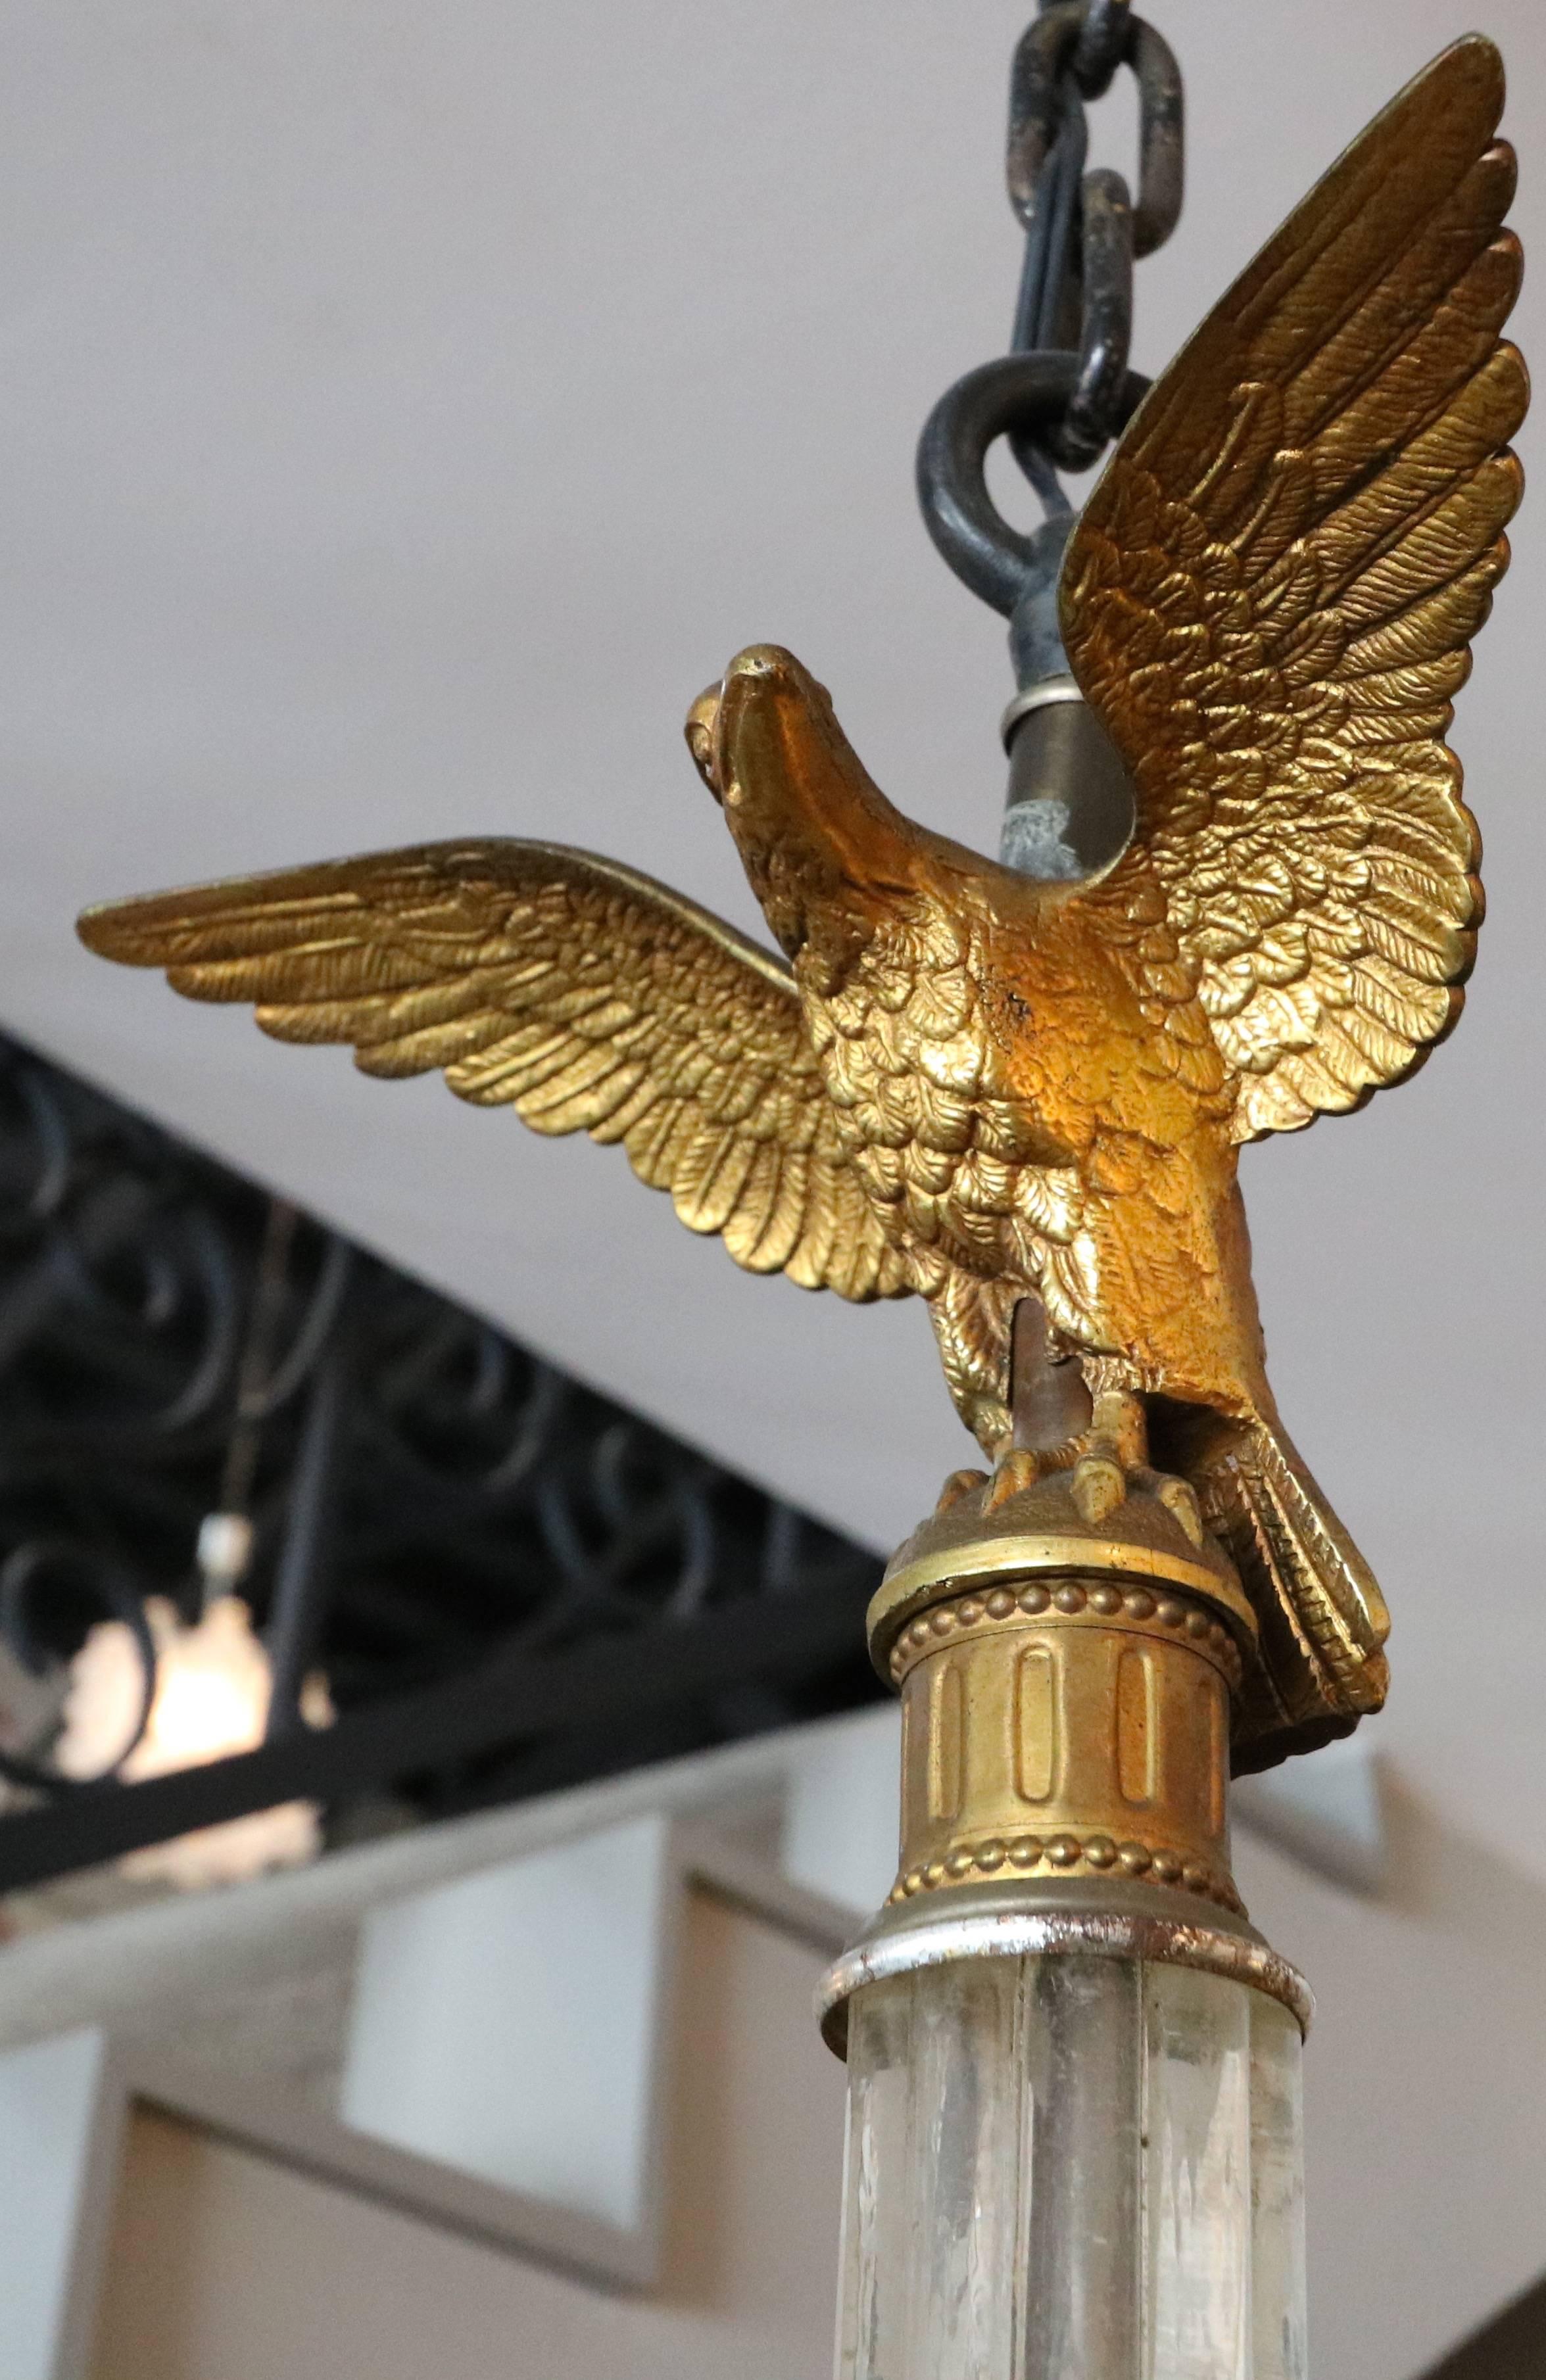 American Glass and Black Metal Imperial Chandelier with Bronze Eagle Finial, 1930s For Sale